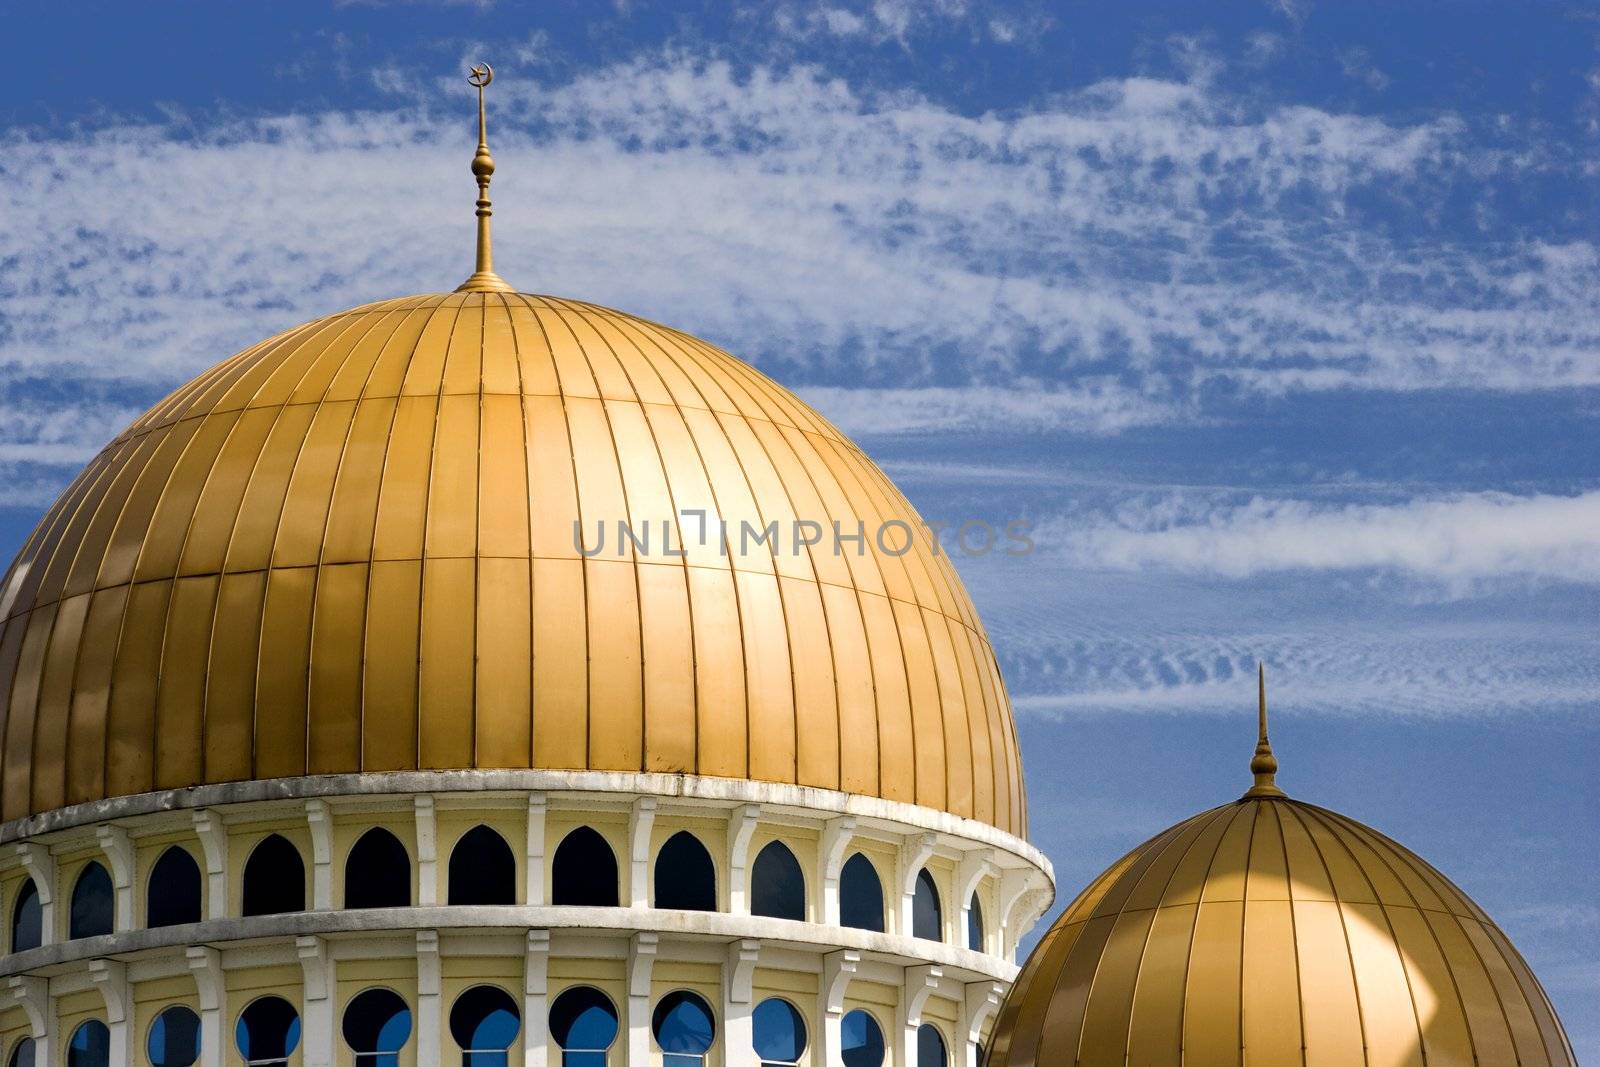 Mosque with gold coloured domes in Malaysia.